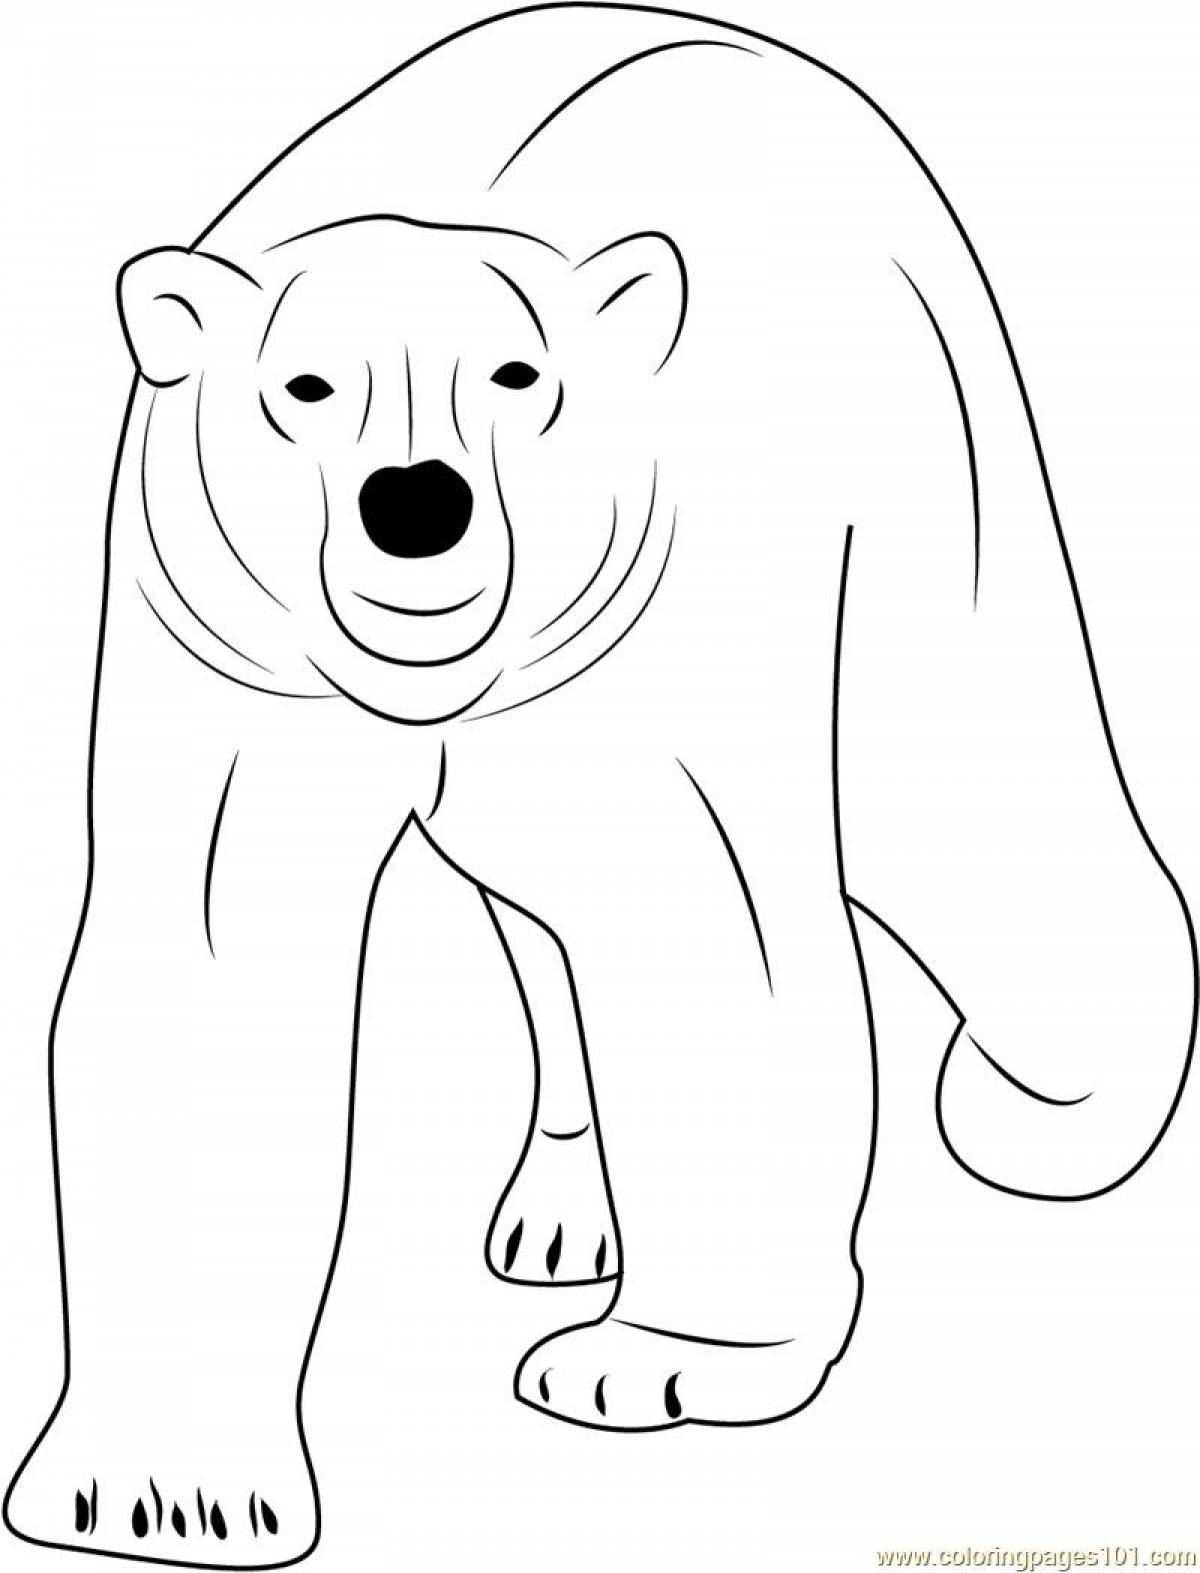 Playful polar bear coloring page for kids